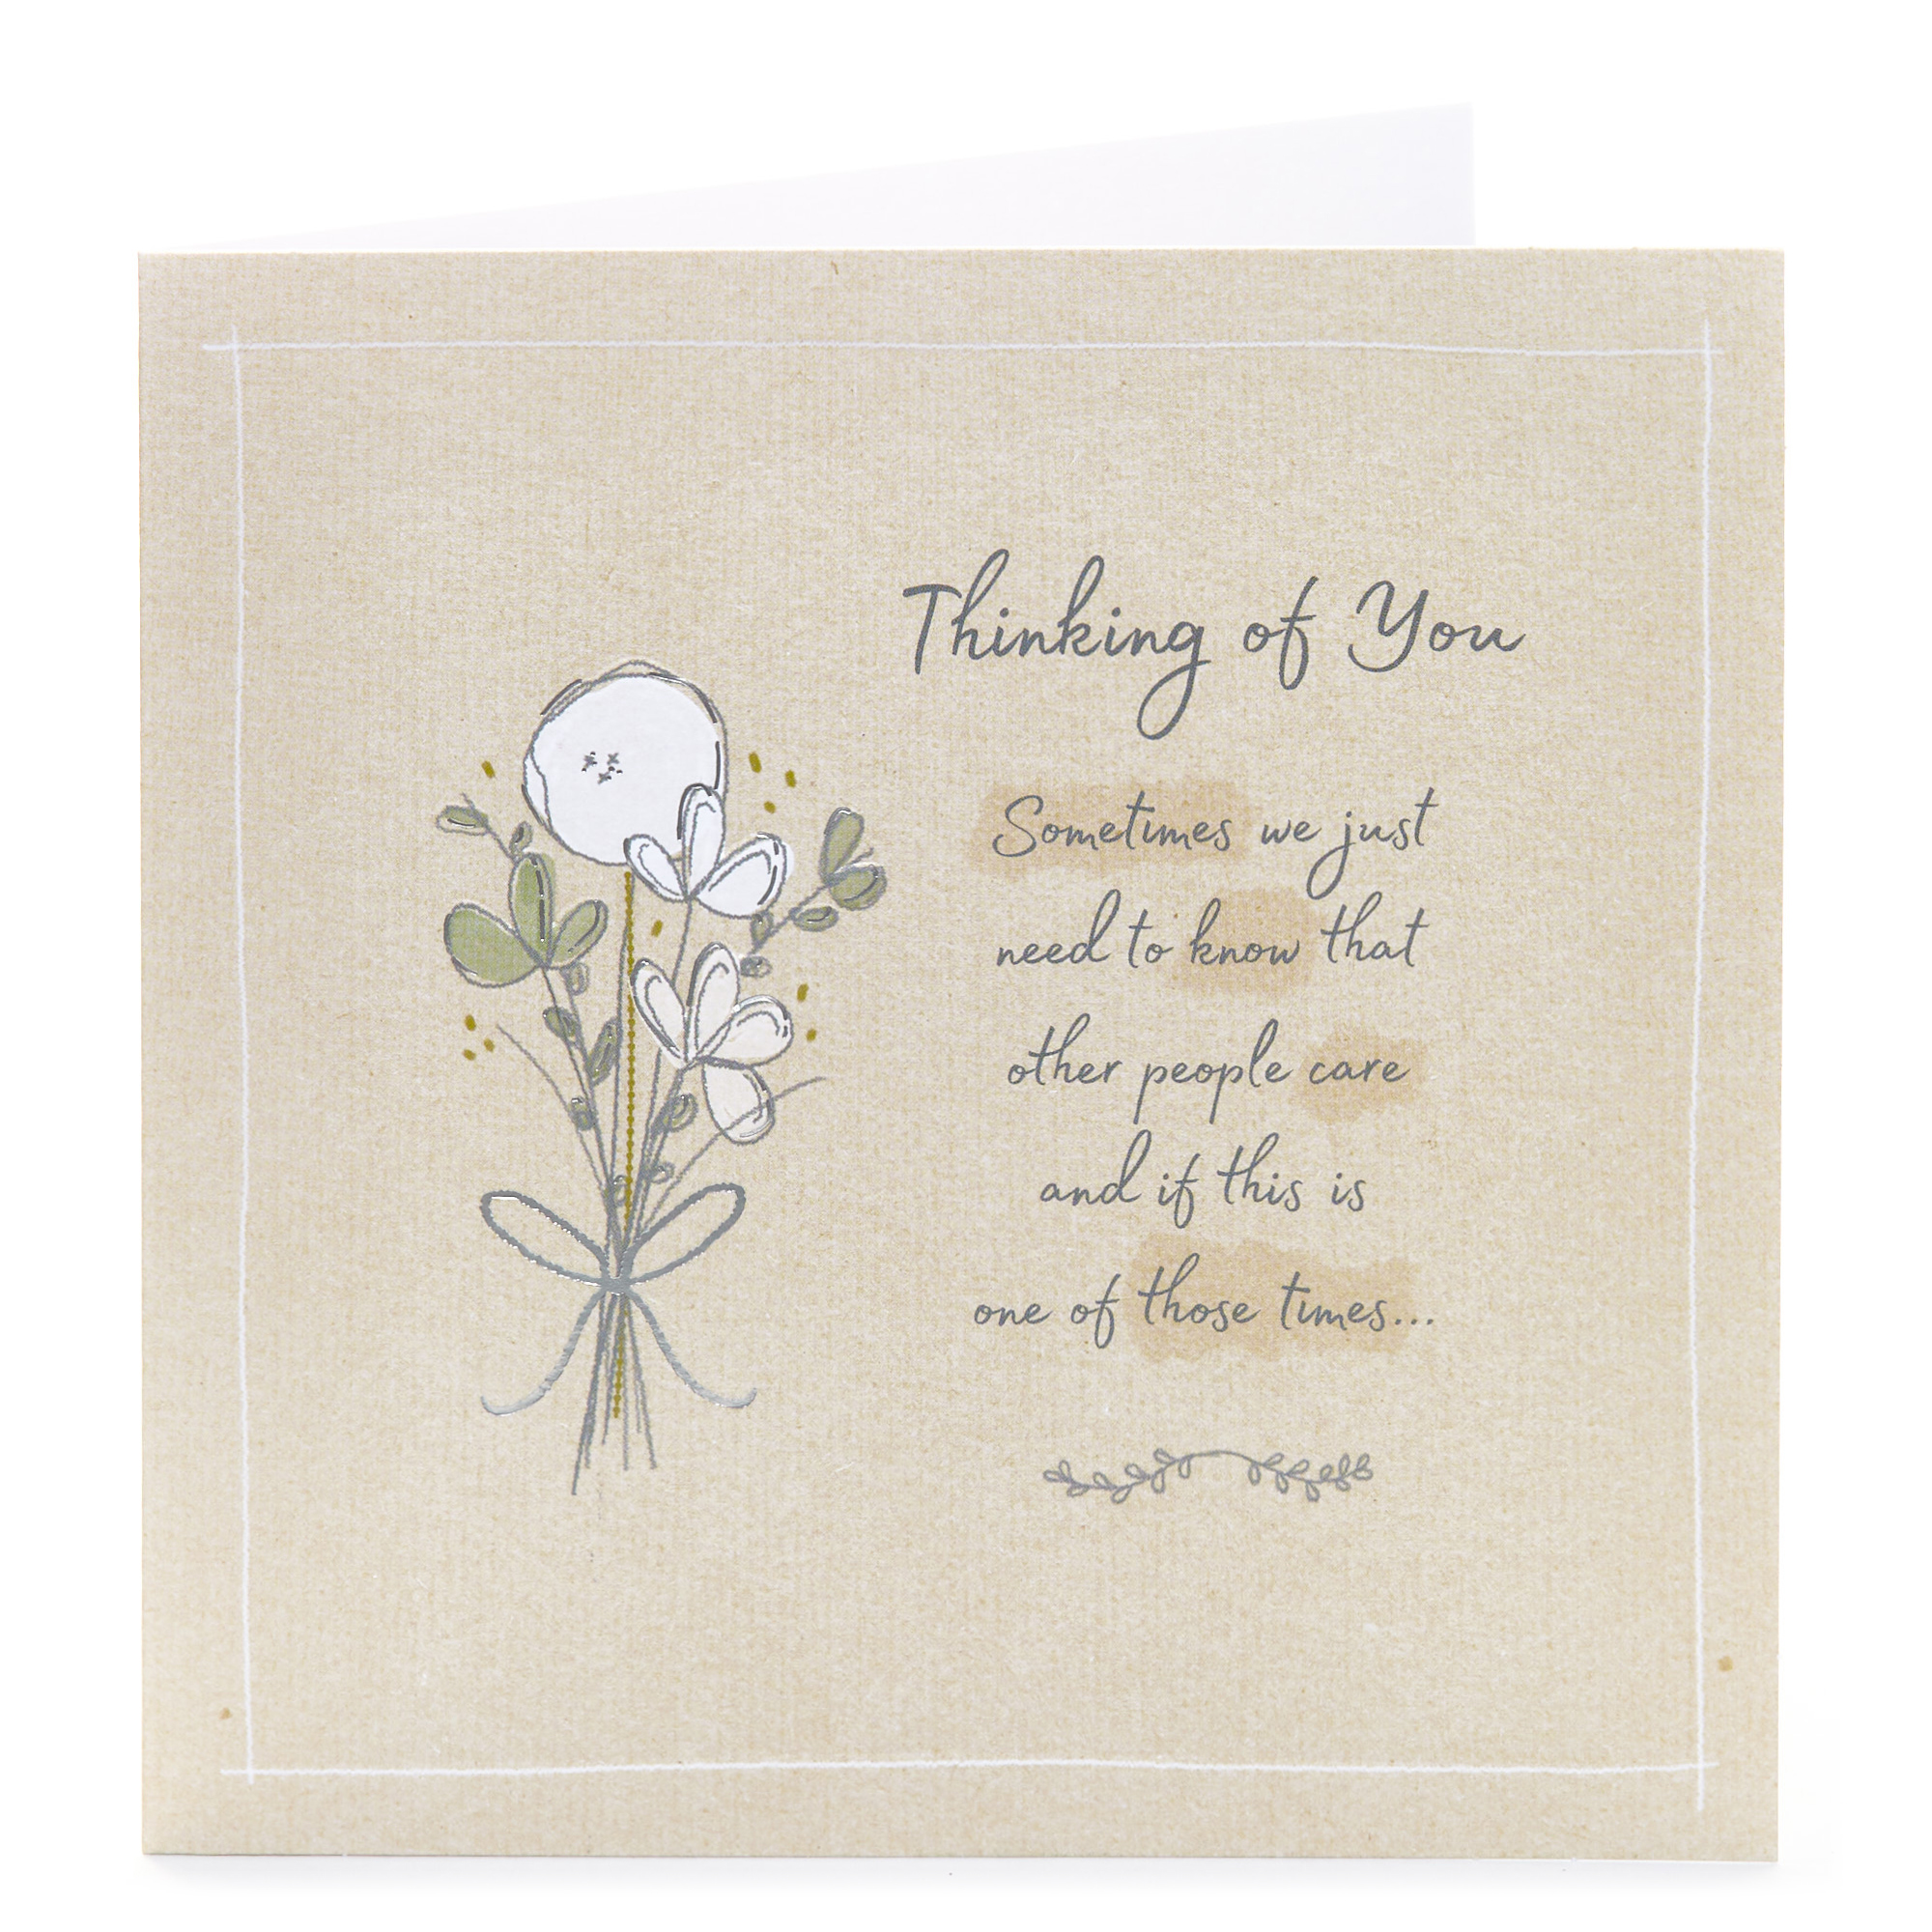 Buy Thinking Of You Card  People Care for GBP 0.99  Card Factory UK